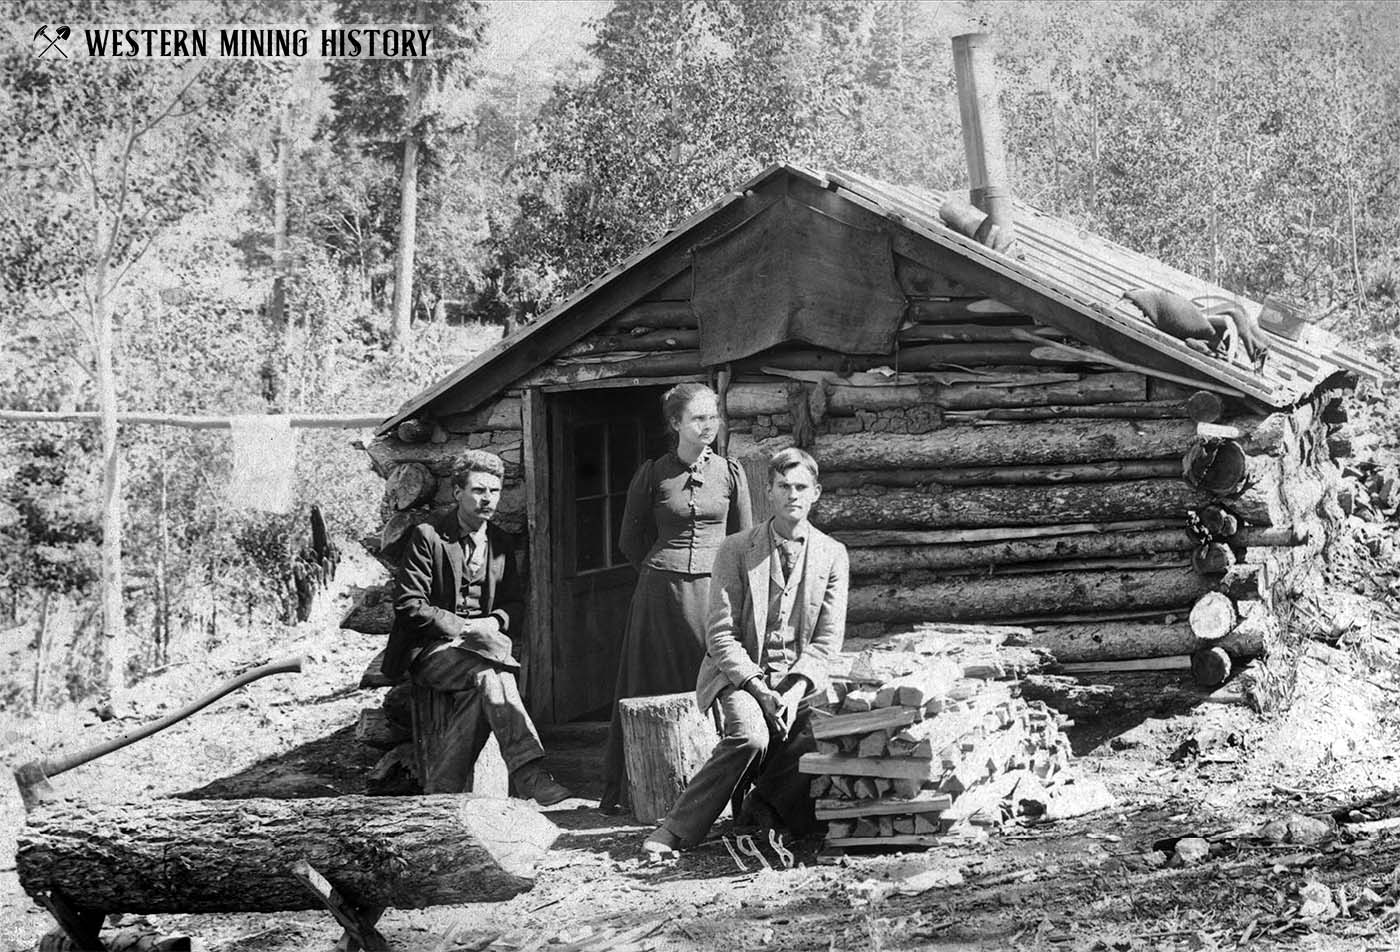 Cabin of Susan “Doc Susie” Anderson's Family in the Cripple Creek District